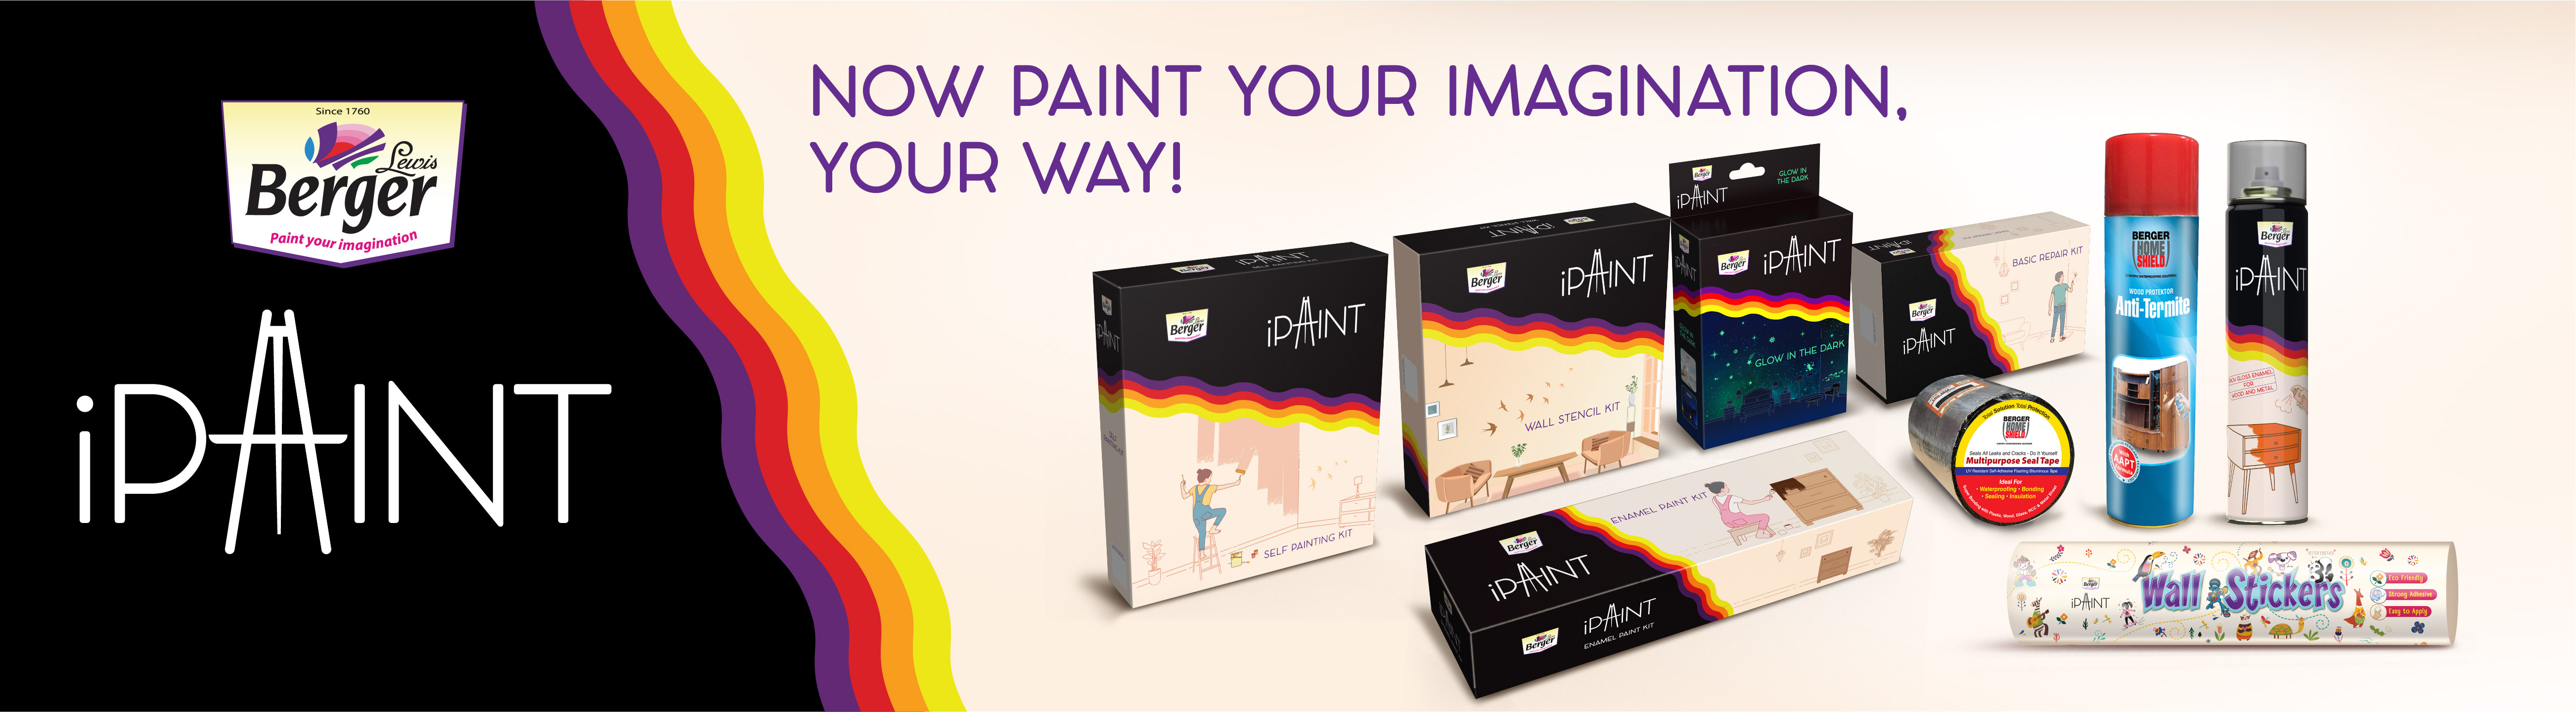 iPaint Wall Stickers Banner